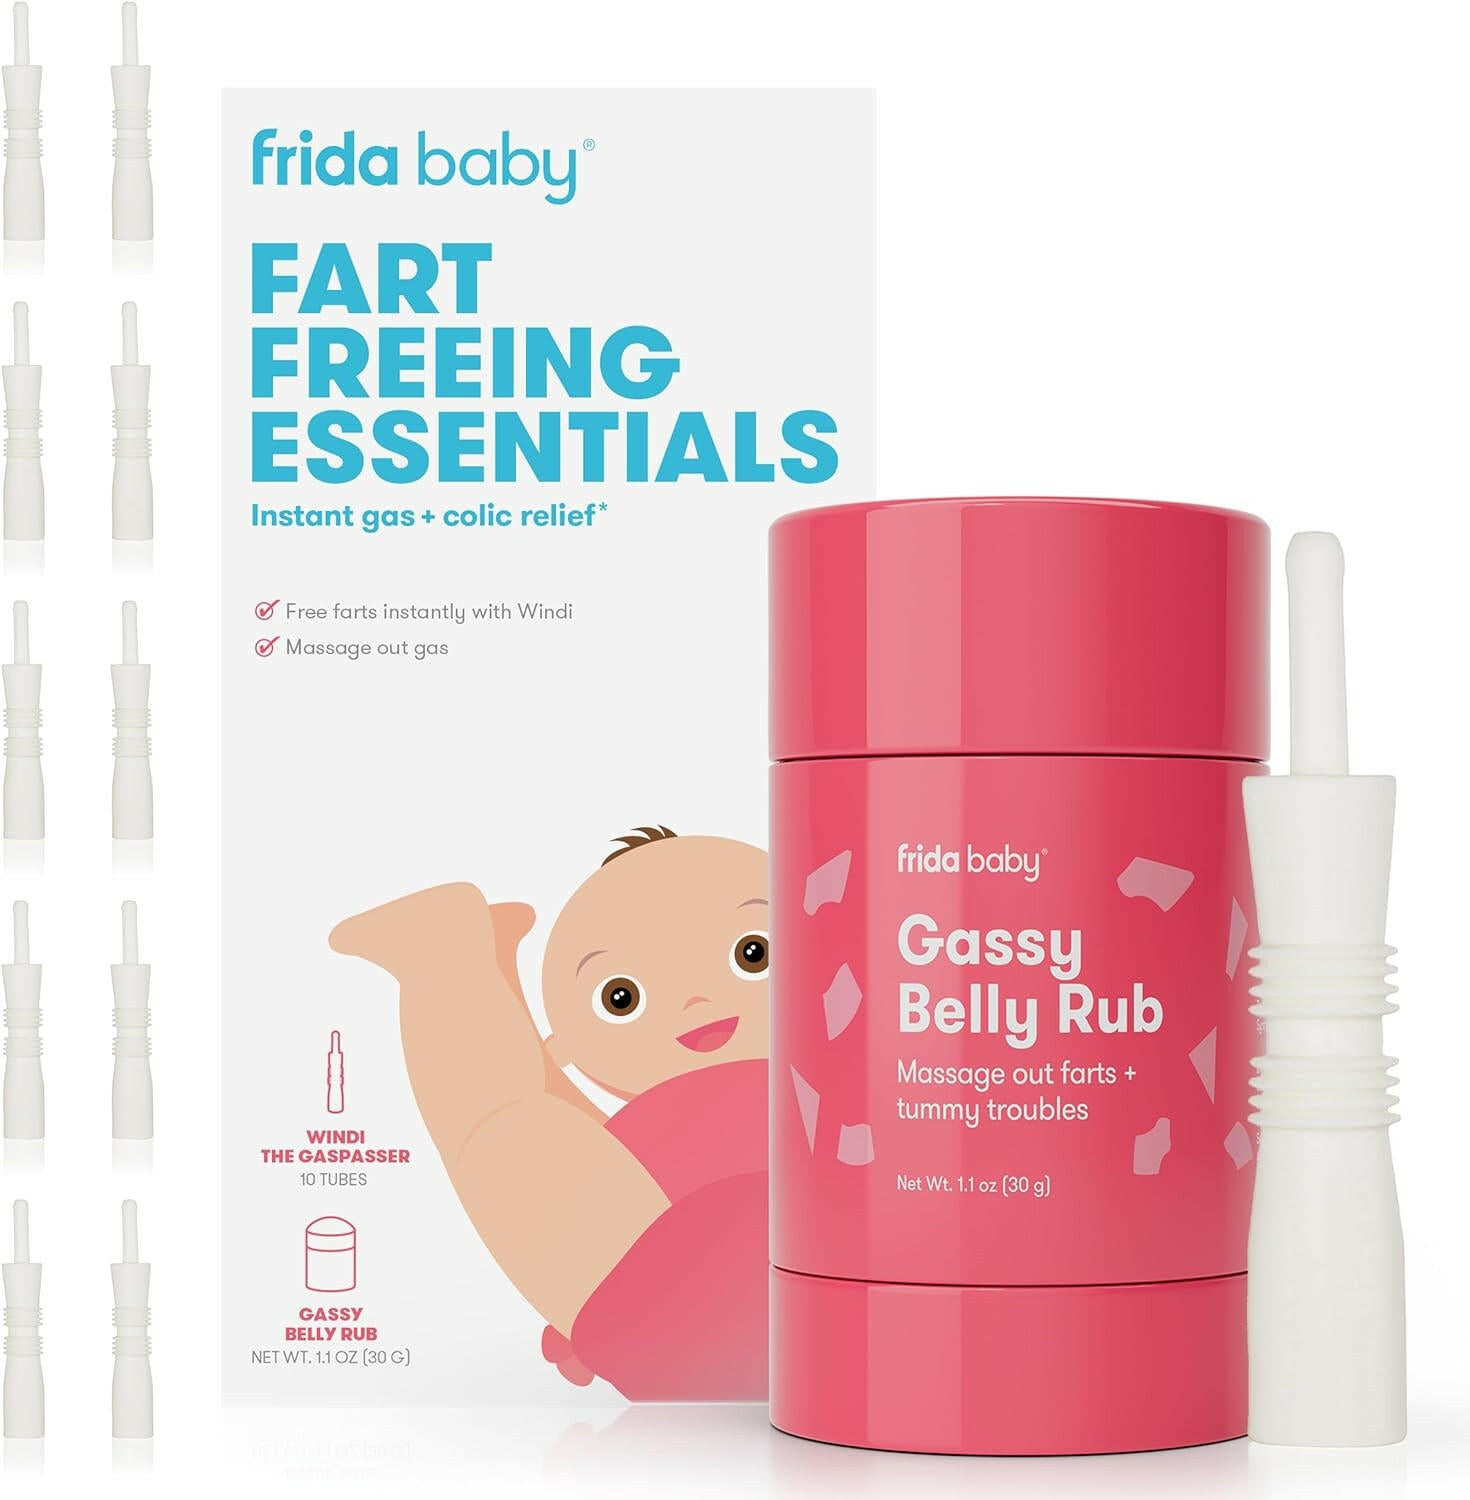 Frida Baby Windi and Gassy Belly Rub for Safe, Natural, and Instant Gas and Colic Relief